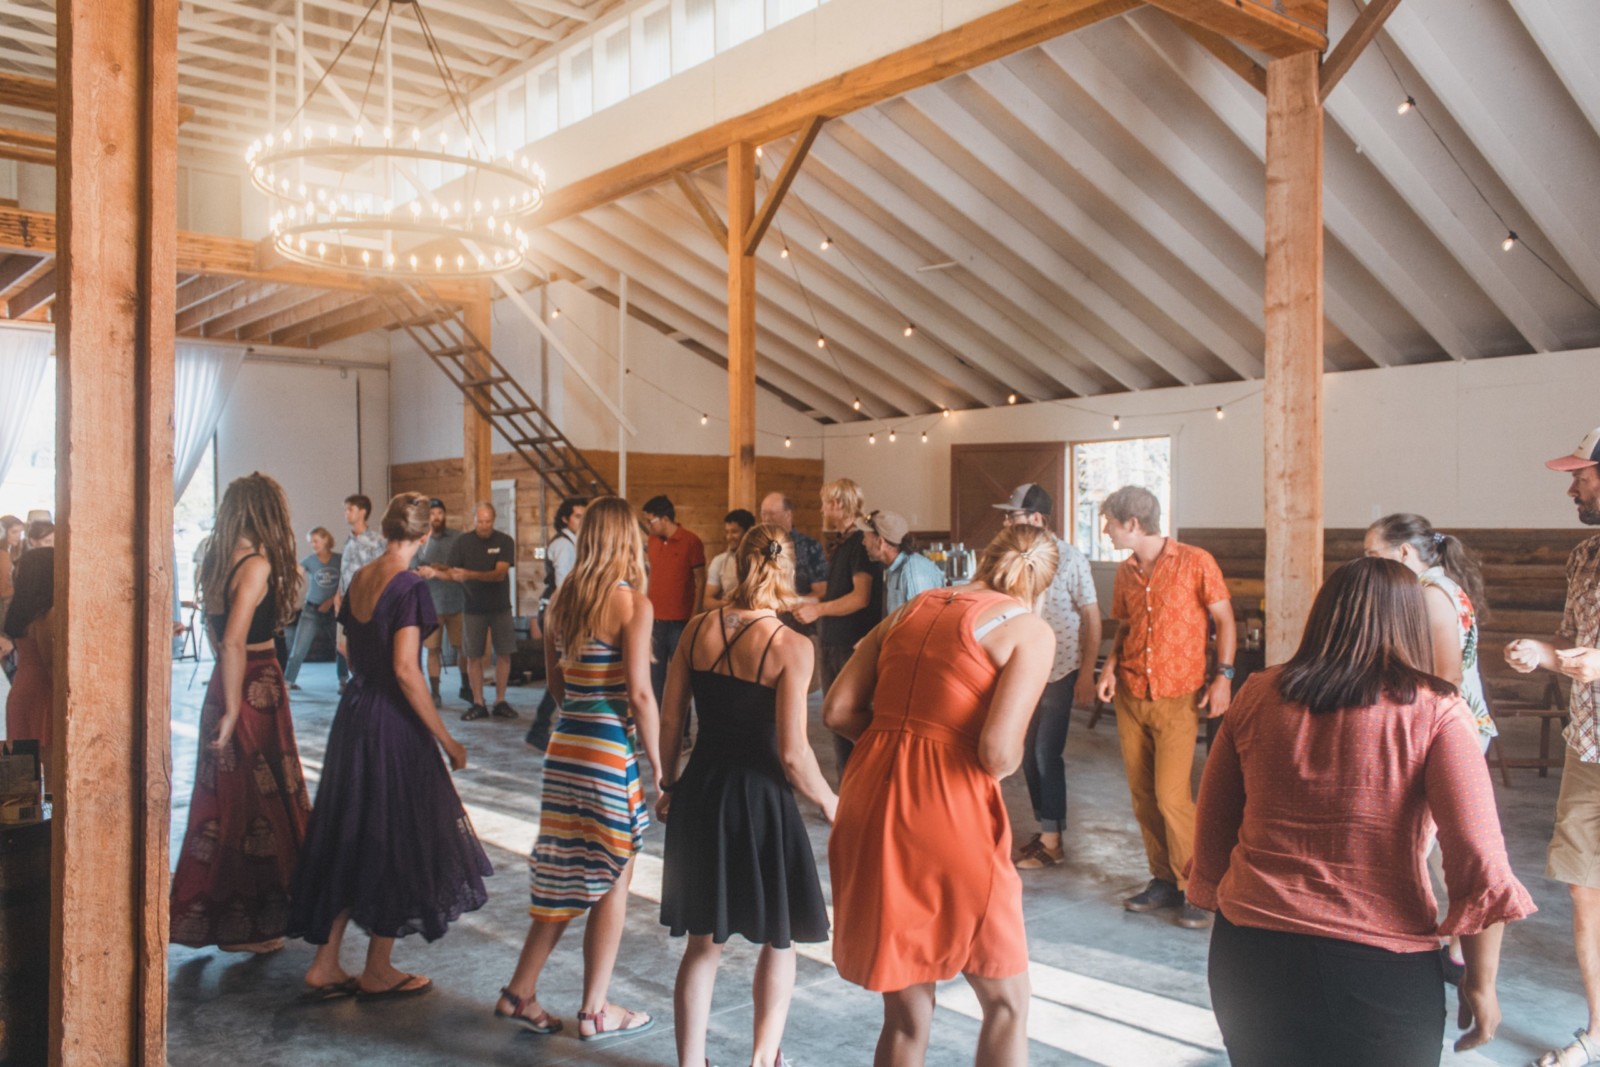 Salsa Night in the Event Barn at Moose Creek Ranch